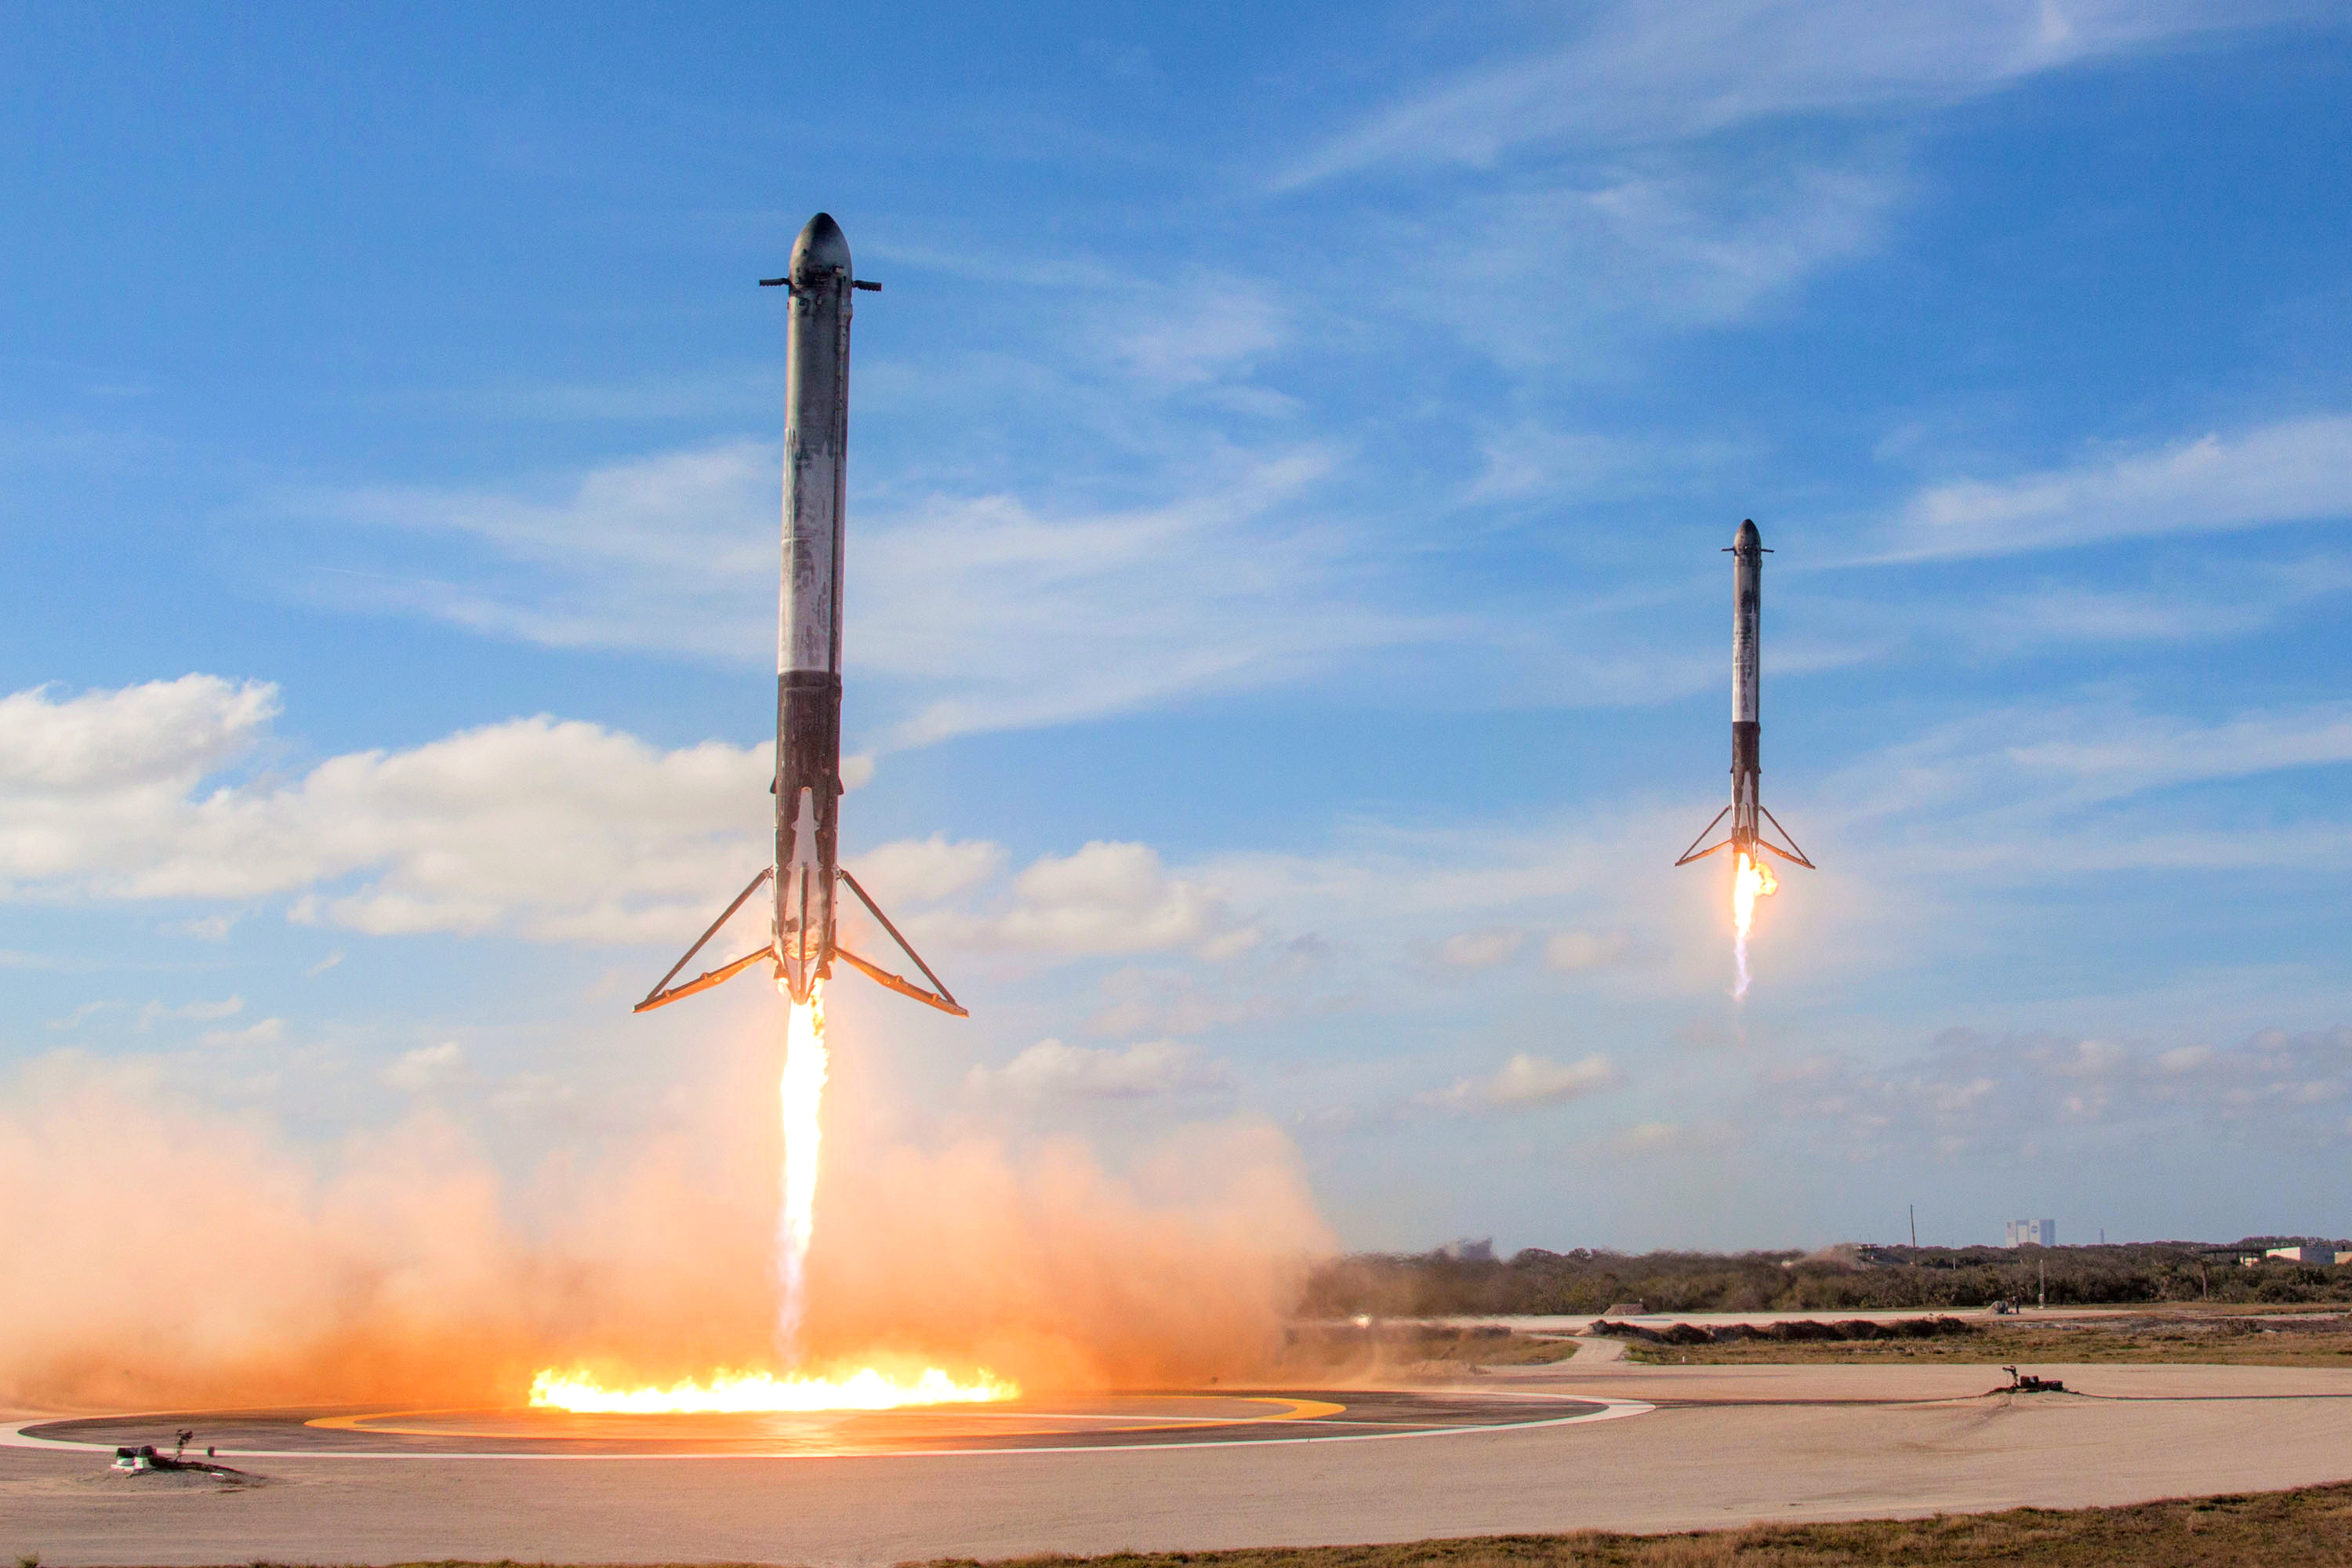 spacex wallpaper,rocket,sky,rocket powered aircraft,aerospace engineering,missile